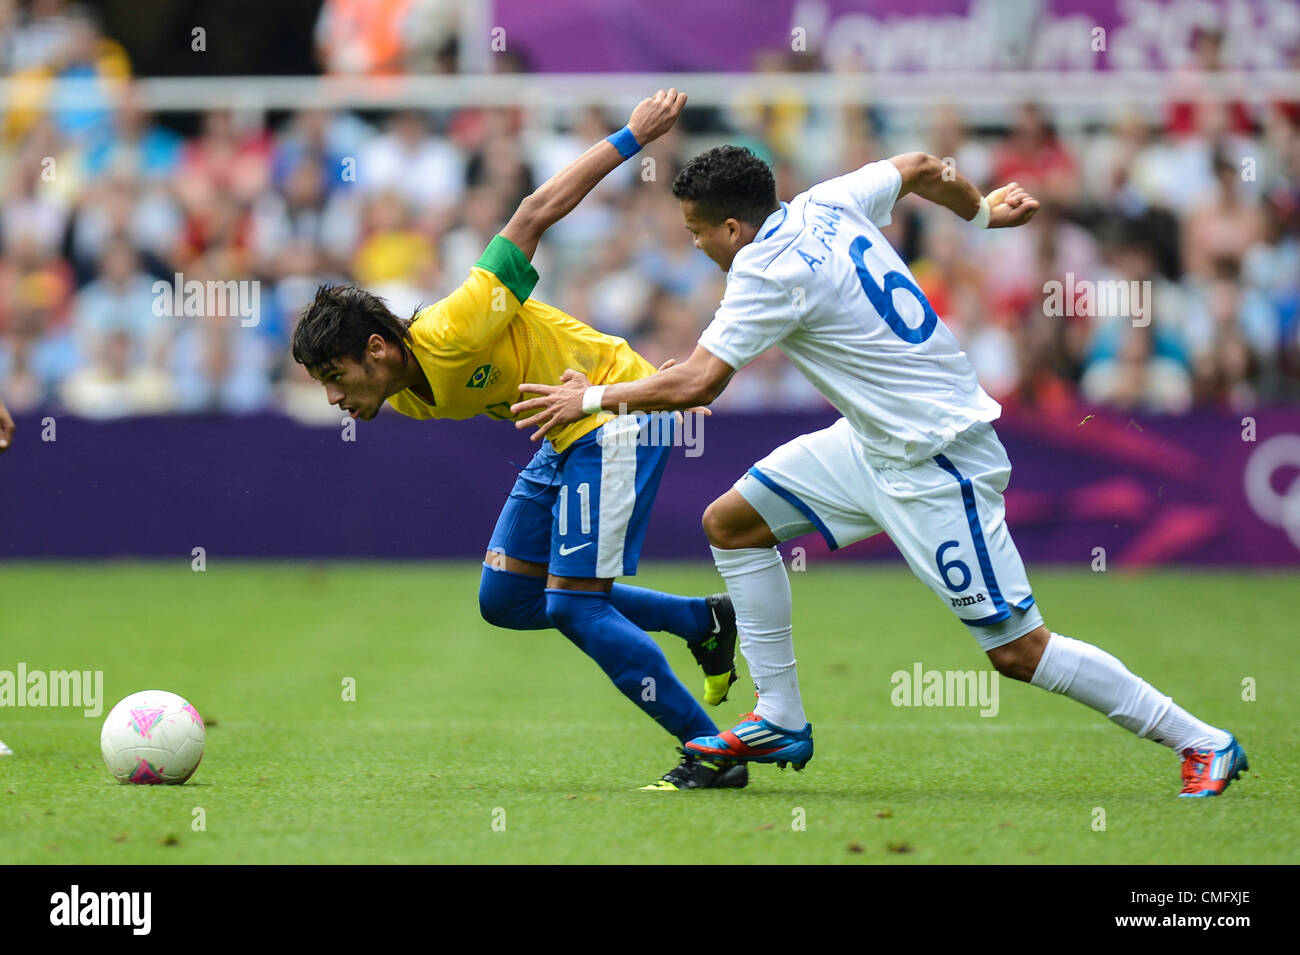 Newcastle, UK. Saturday 4th August 2012. Neymar of Brazil is chased by Arnold Peralta during the Olympic Football Men's Quarter Final game between Brazil and Honduras from St James Park. Brazil rallied to come back and win the game 3-2 and went through to the semi-final of the tournament. Stock Photo